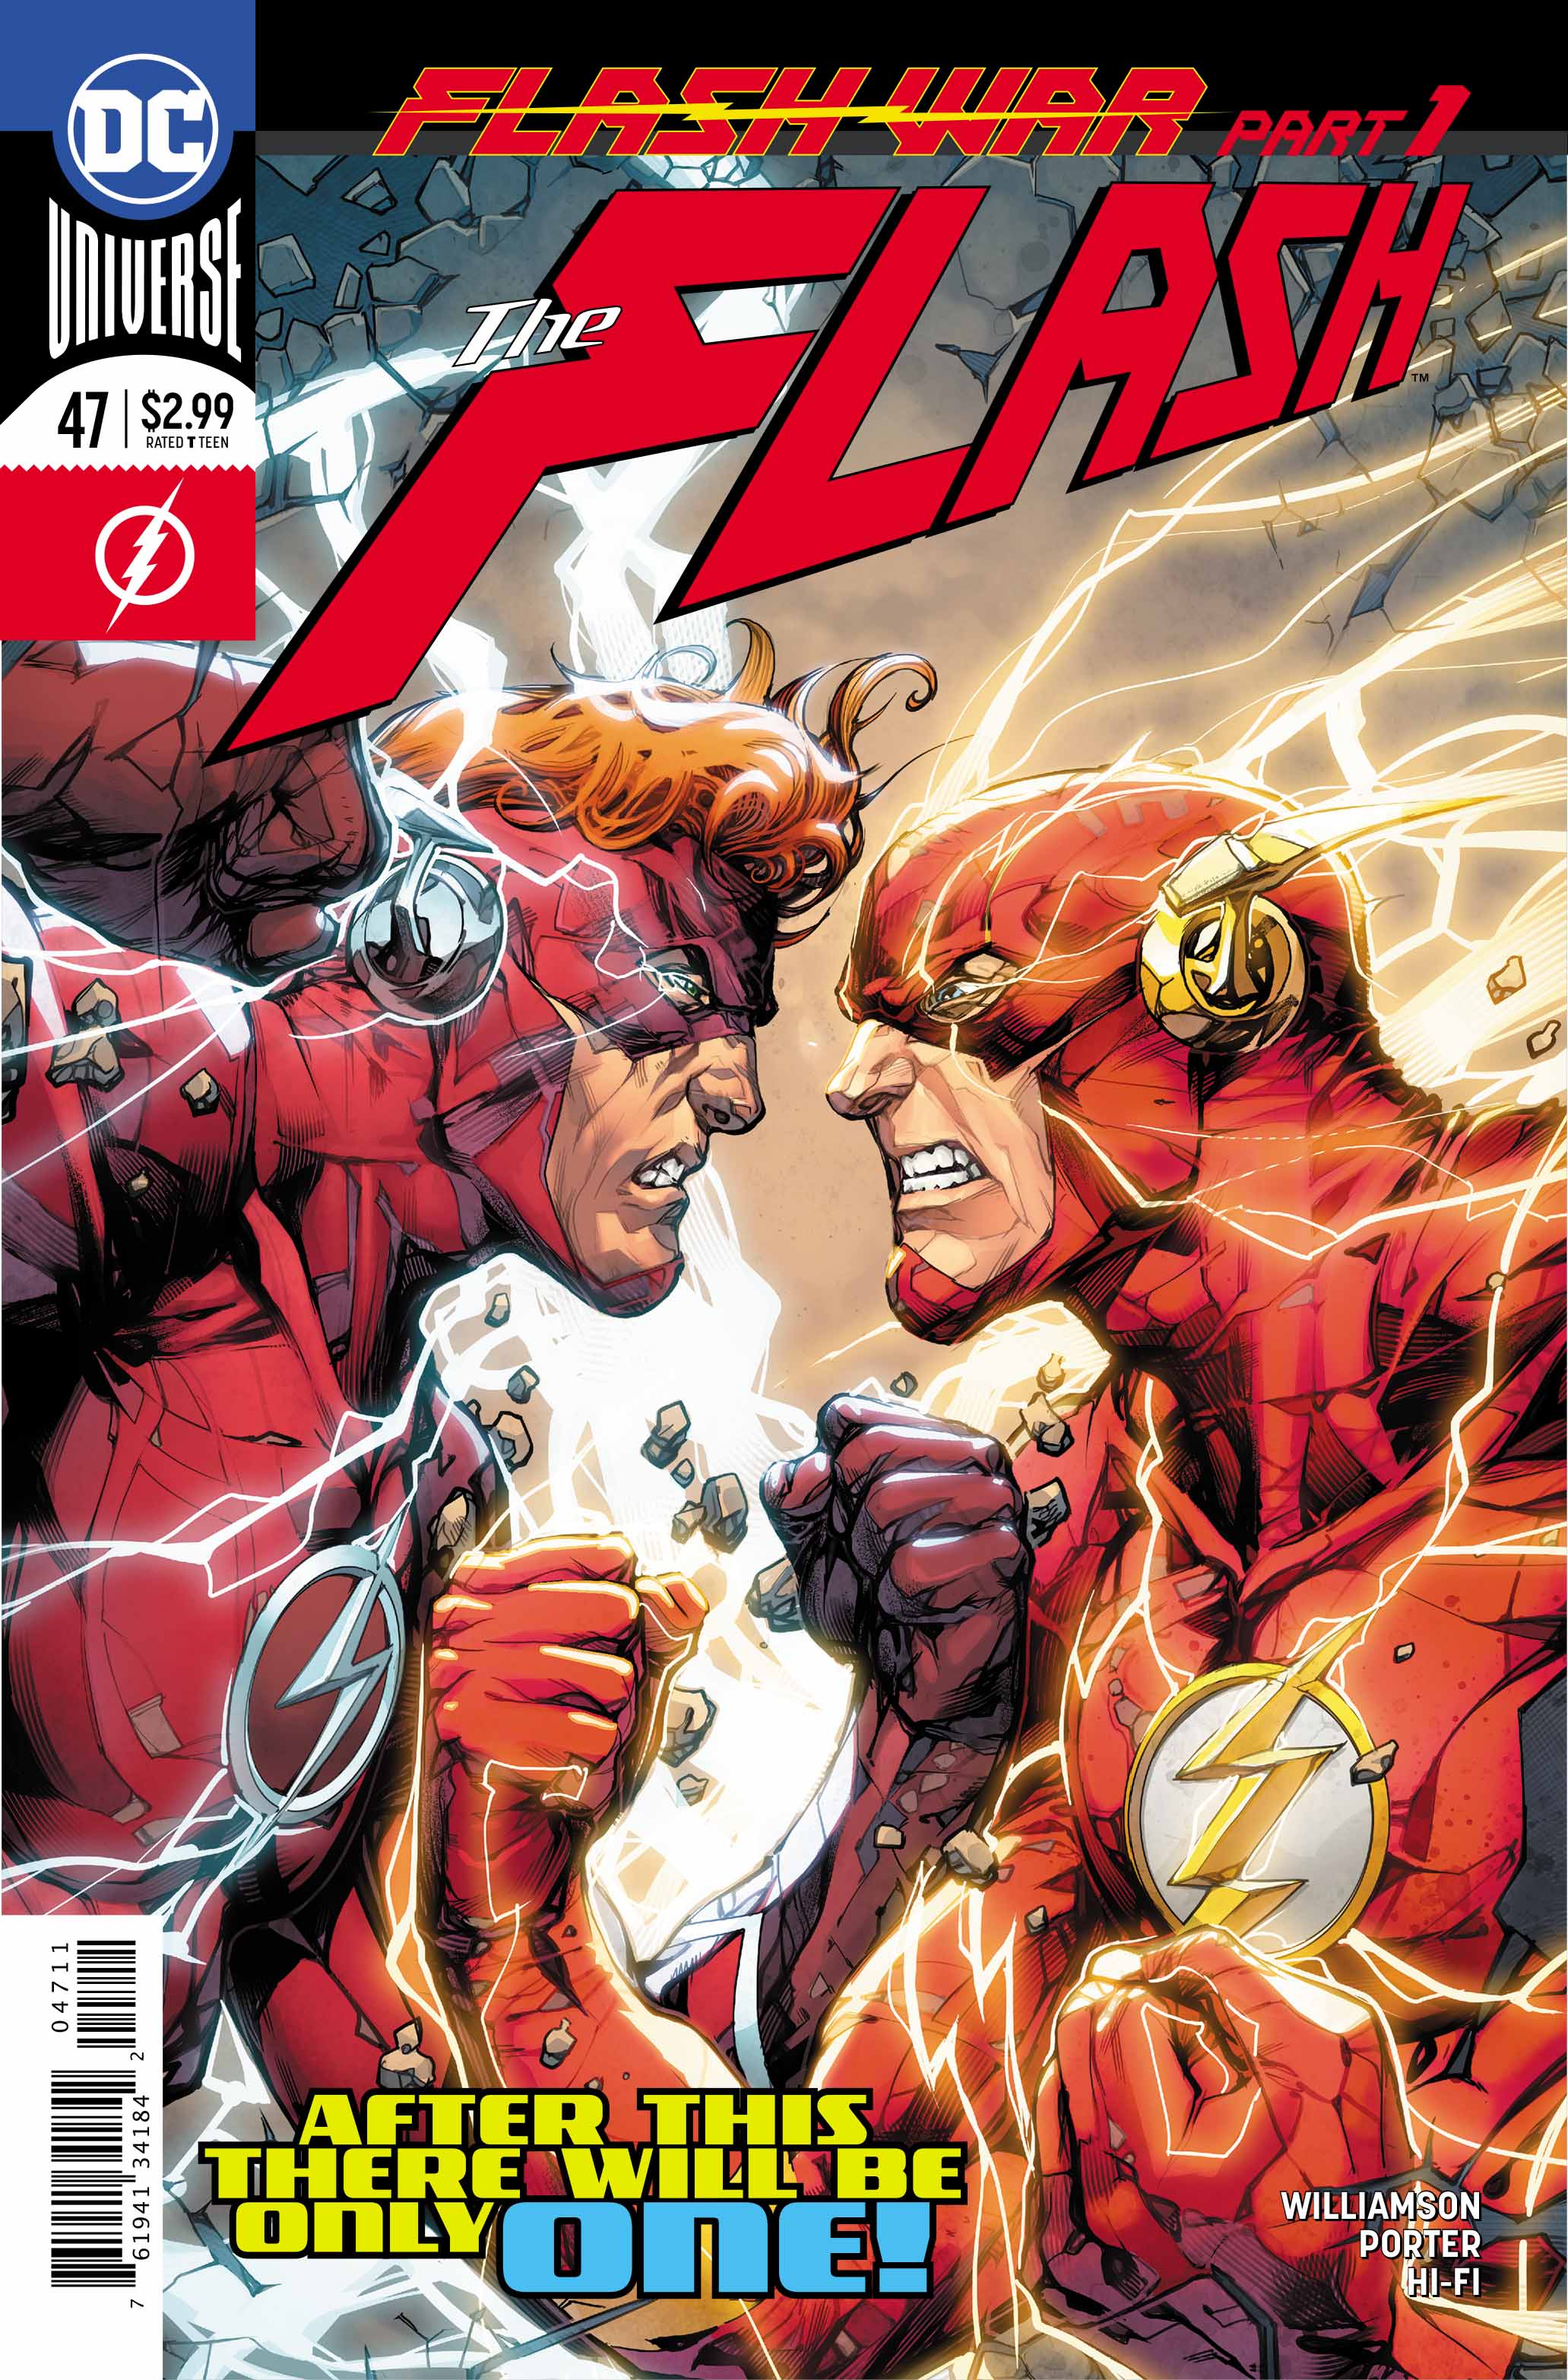 The Flash #47 Review: Flash War starts here!